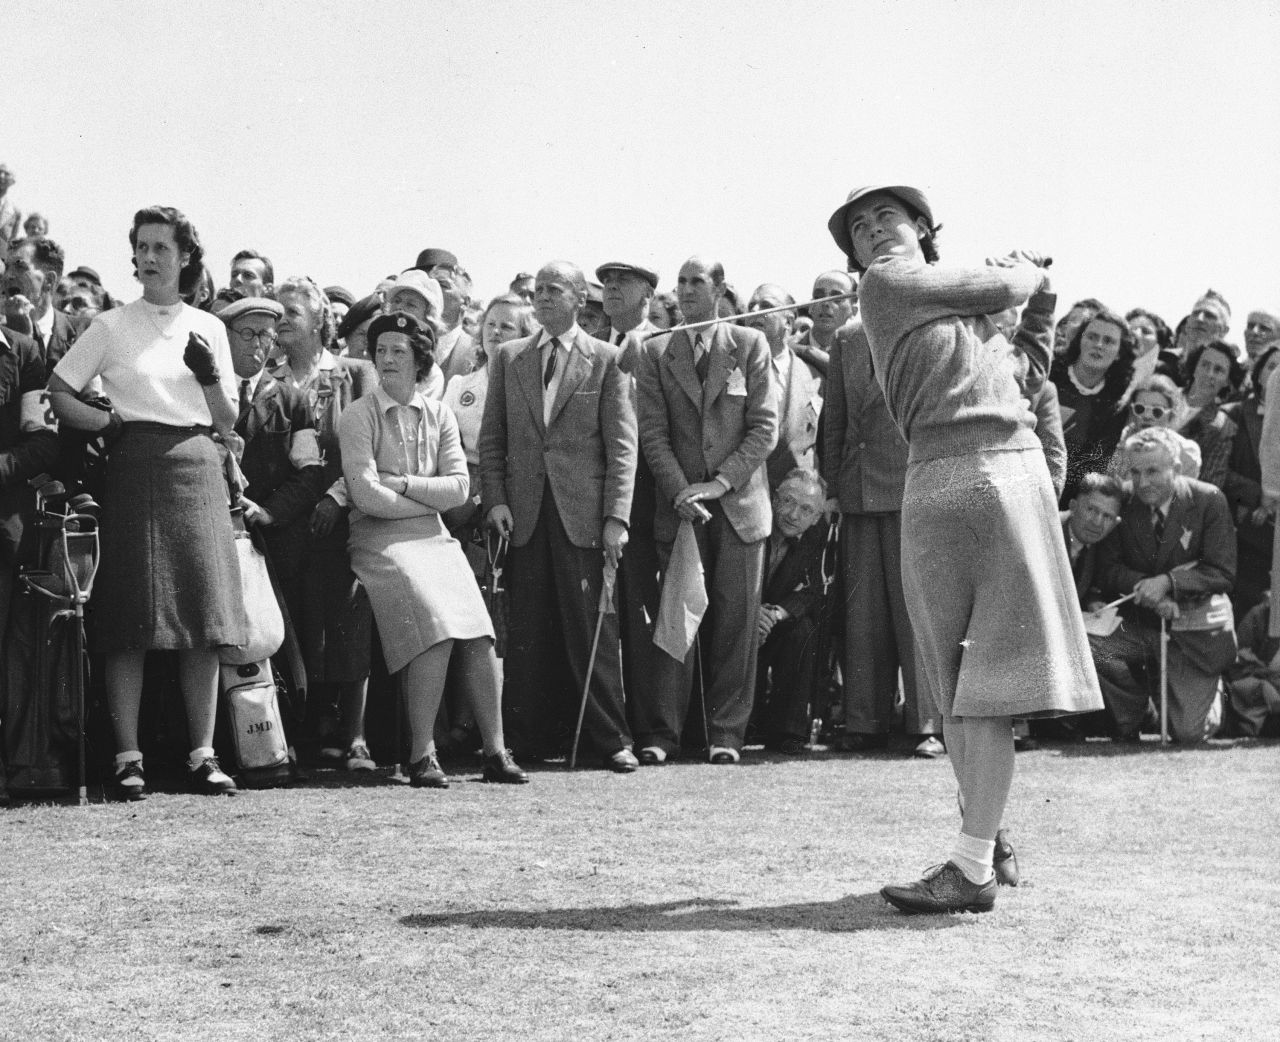 <a href="http://www.cnn.com/2015/08/07/us/lpga-founder-louise-suggs-dies-at-91/index.html" target="_blank">Louise Suggs,</a> one of the 13 founders of the Ladies Professional Golf Association, died at the age of 91, the LPGA announced on August 7.